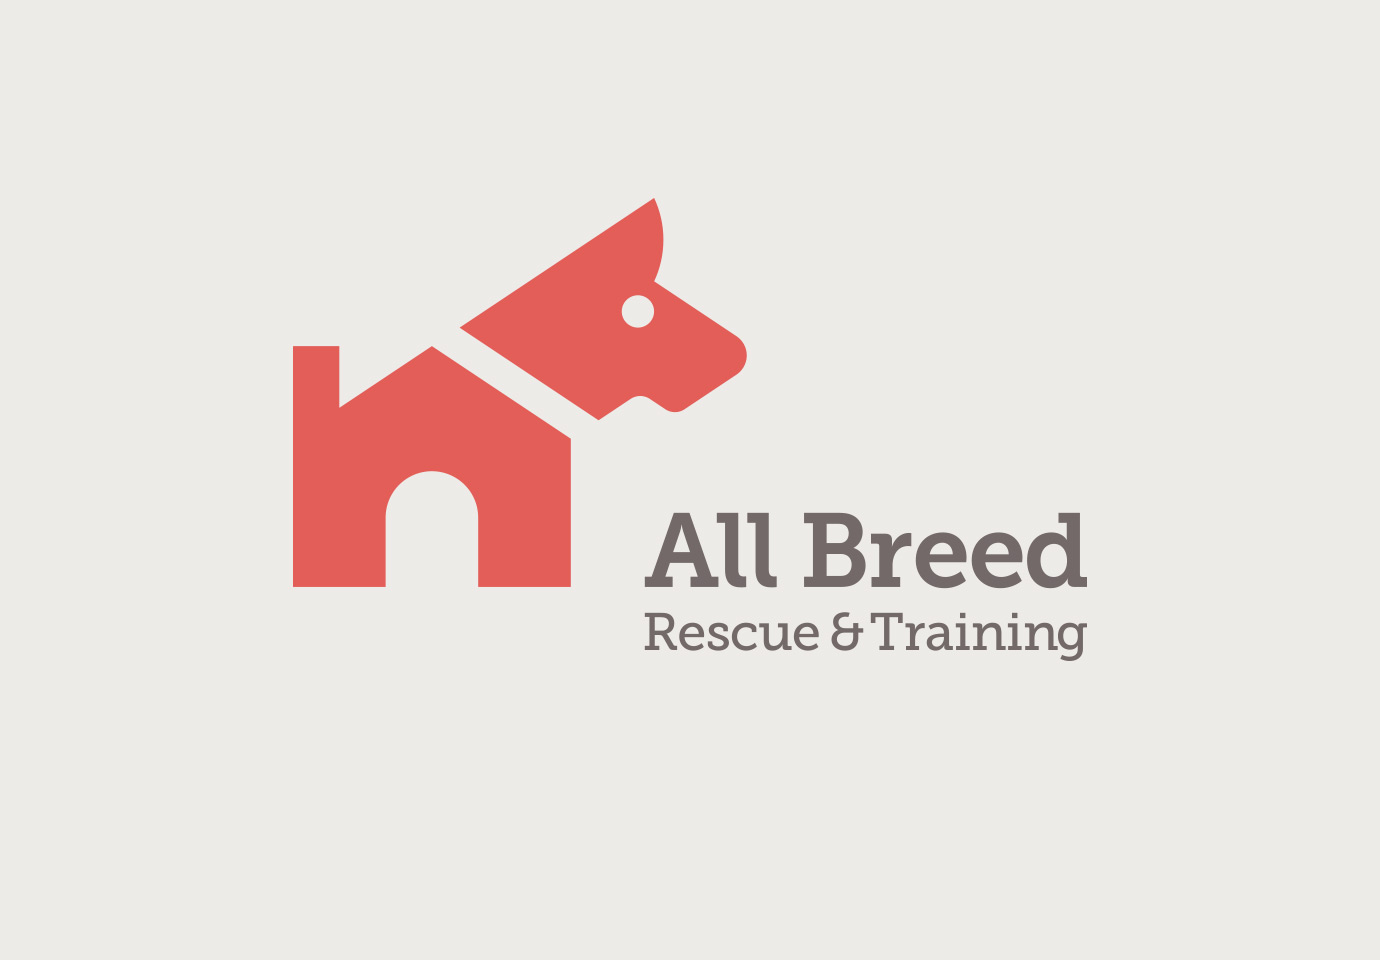 The All Breed Rescue and Training logo and red symbol, a silhoutte of a dog's body made partially from the shape of a house.